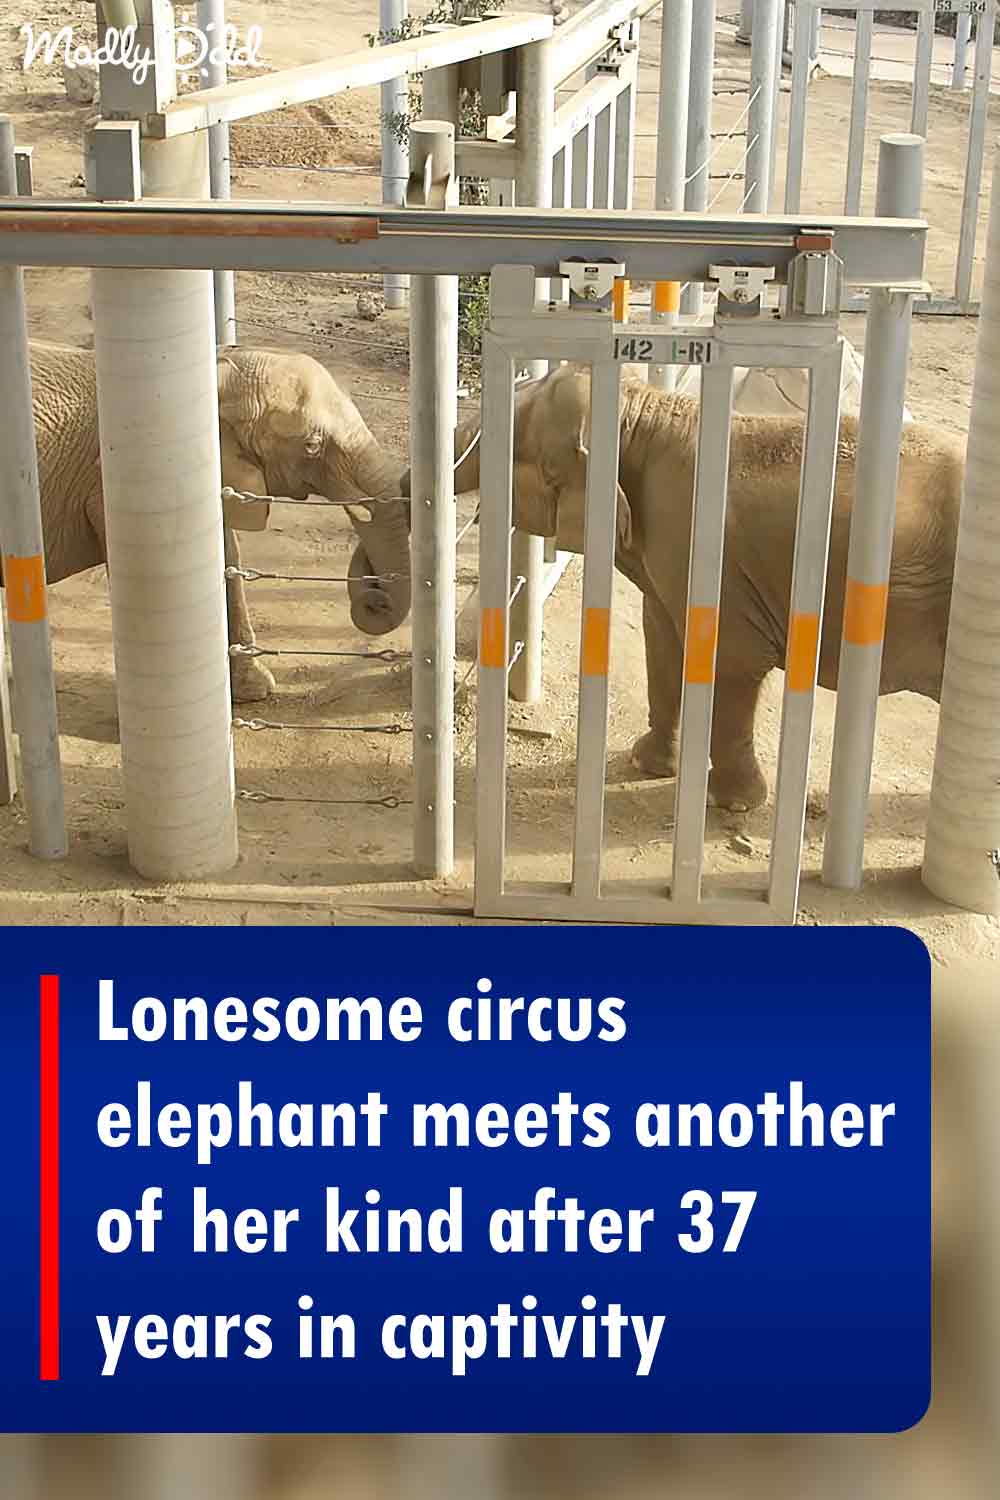 Lonesome circus elephant meets another of her kind after 37 years in captivity